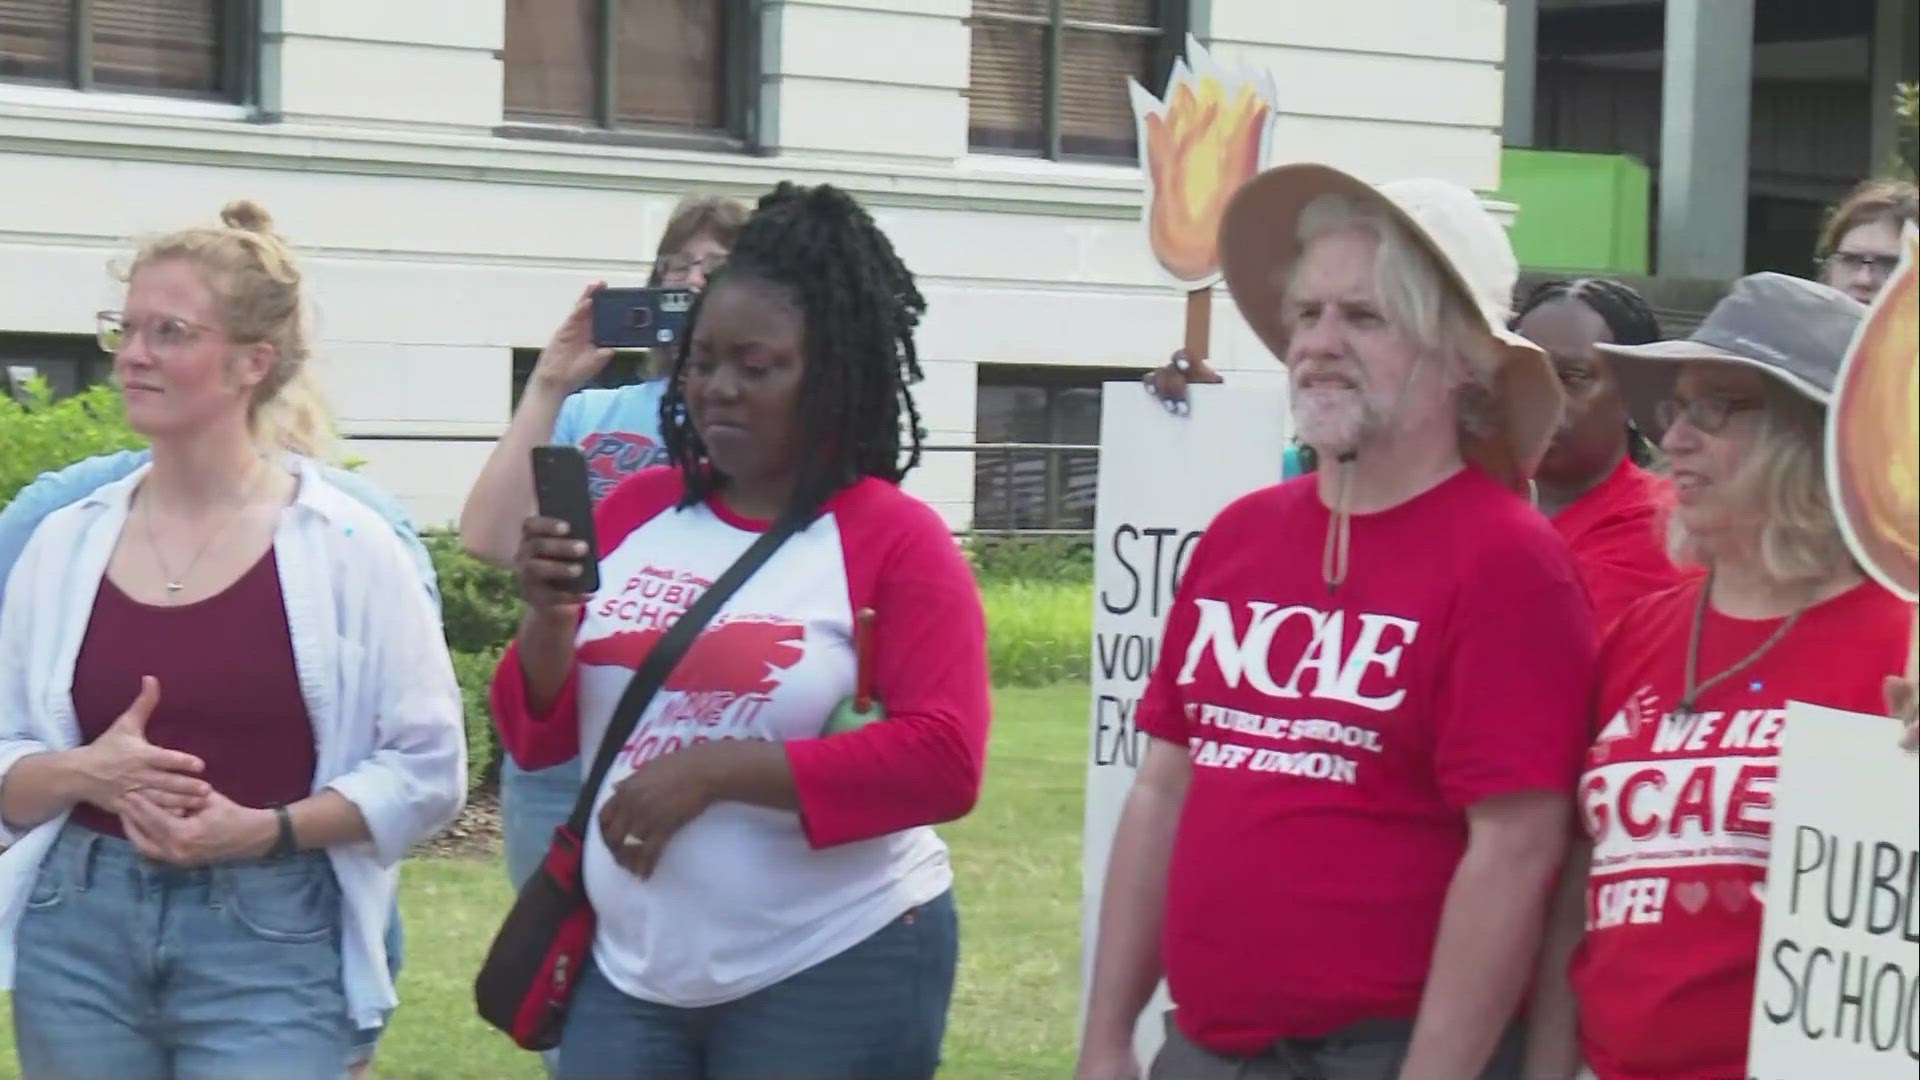 GCAE holds rally ahead of county commissioners meeting demanding more money.